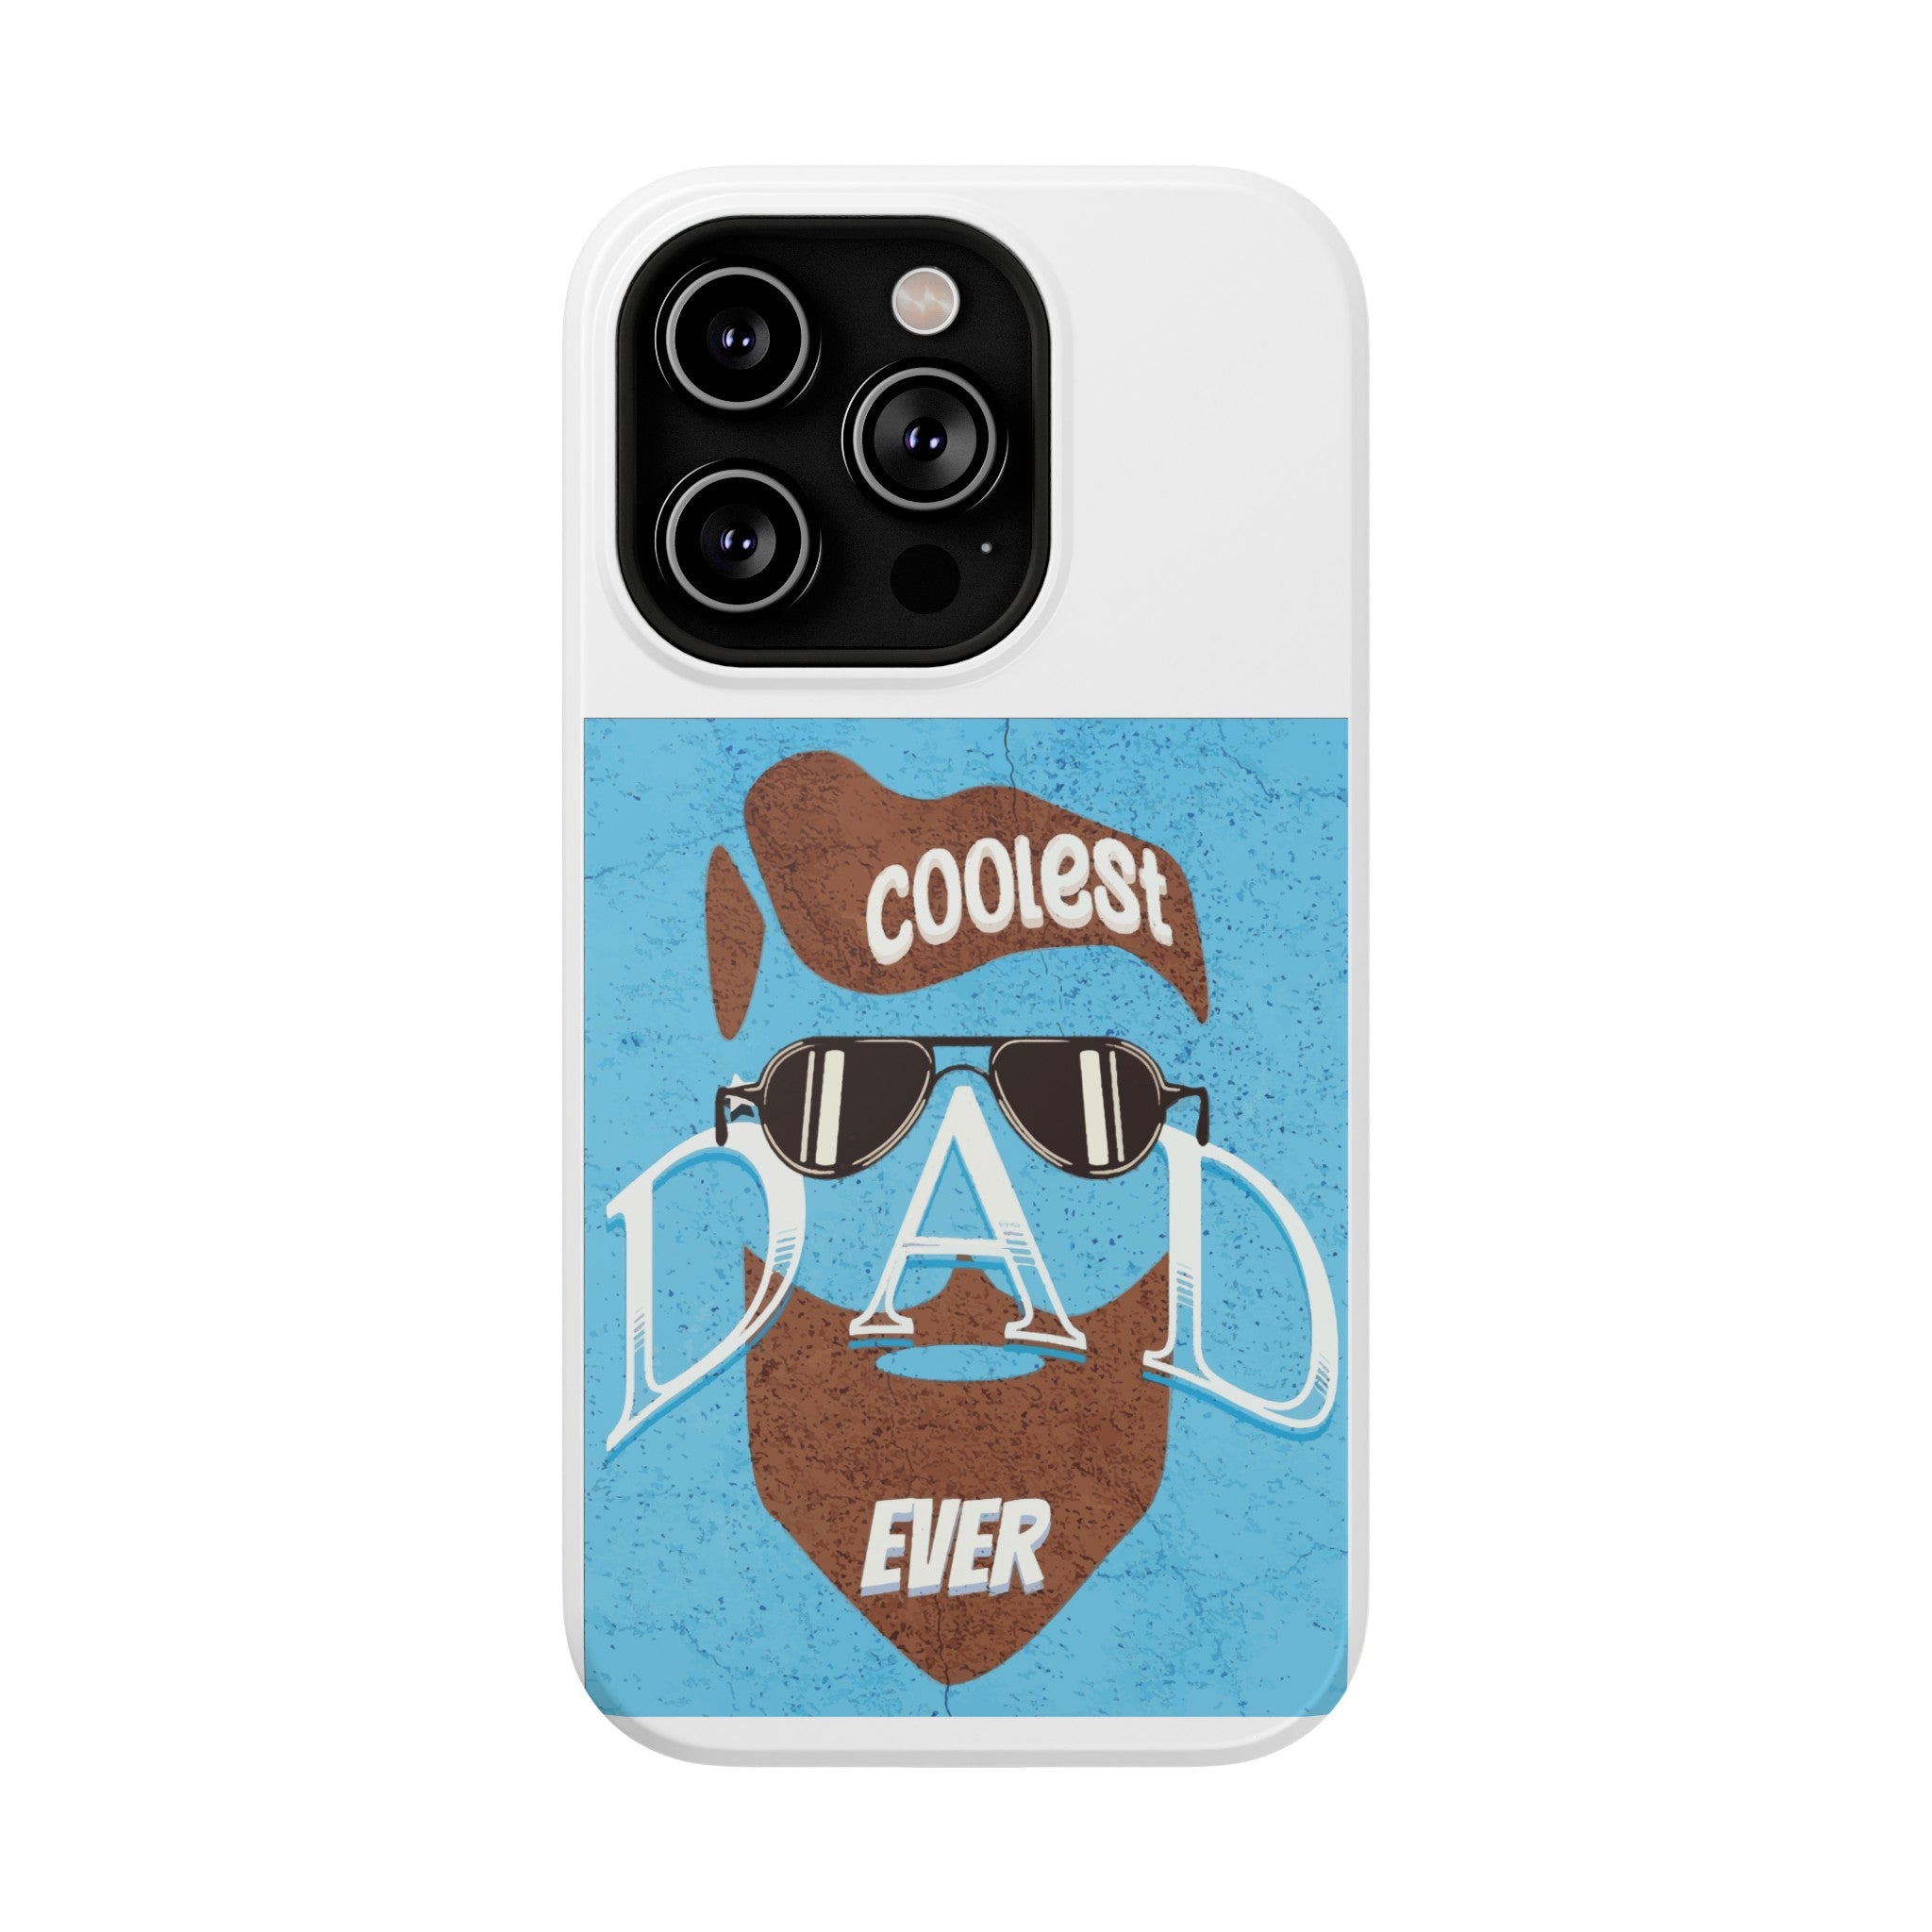 Coolest Dad Ever Impact-Resistant Phone Cases